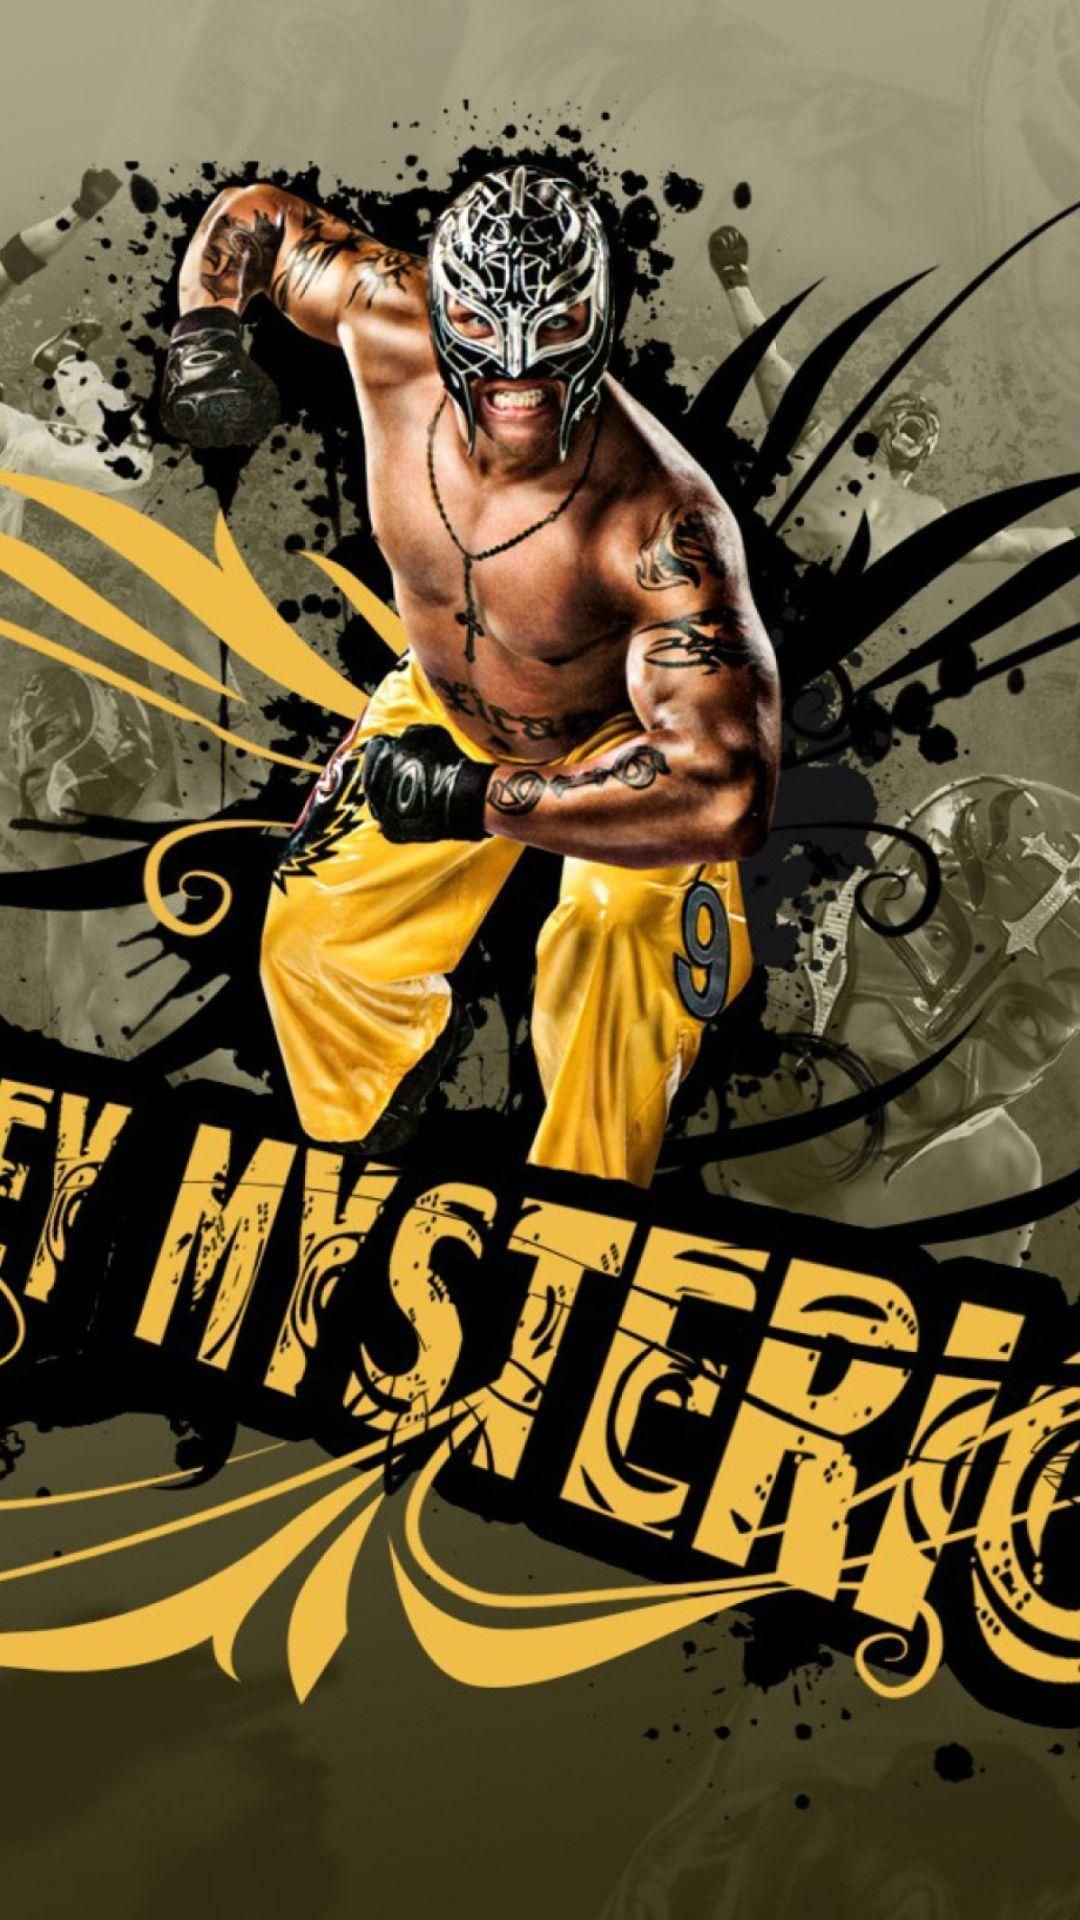 1080x1920 Rey Mysterio Wallpaper for iPhone | Wwe pictures, Wrestling wwe, Rey